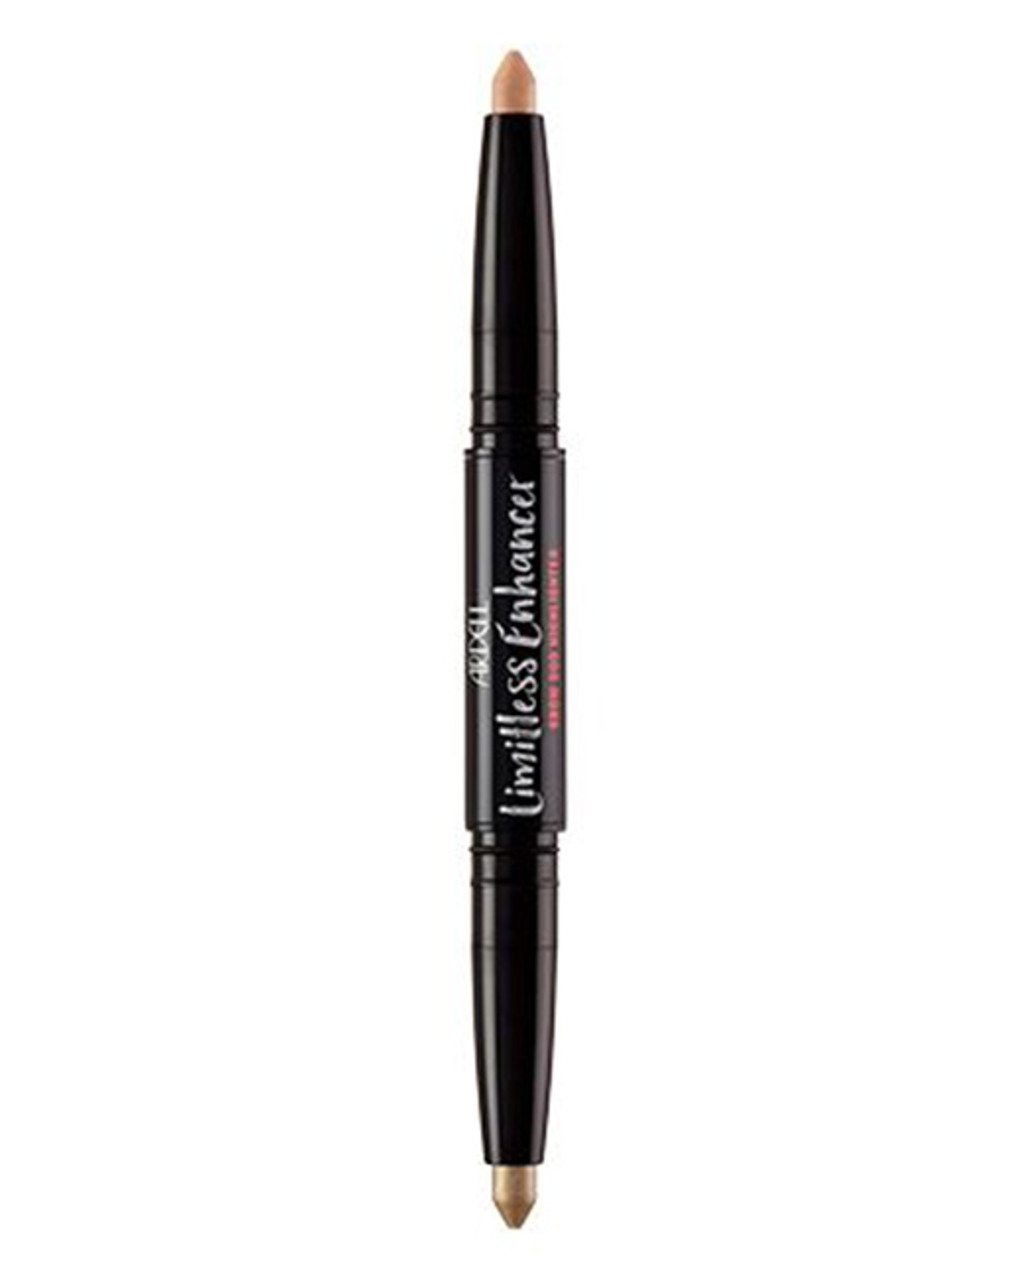 Ardell Beauty Limitless Brow Enhancer Bare/Champagne - 0.06 oz / 1.8 g